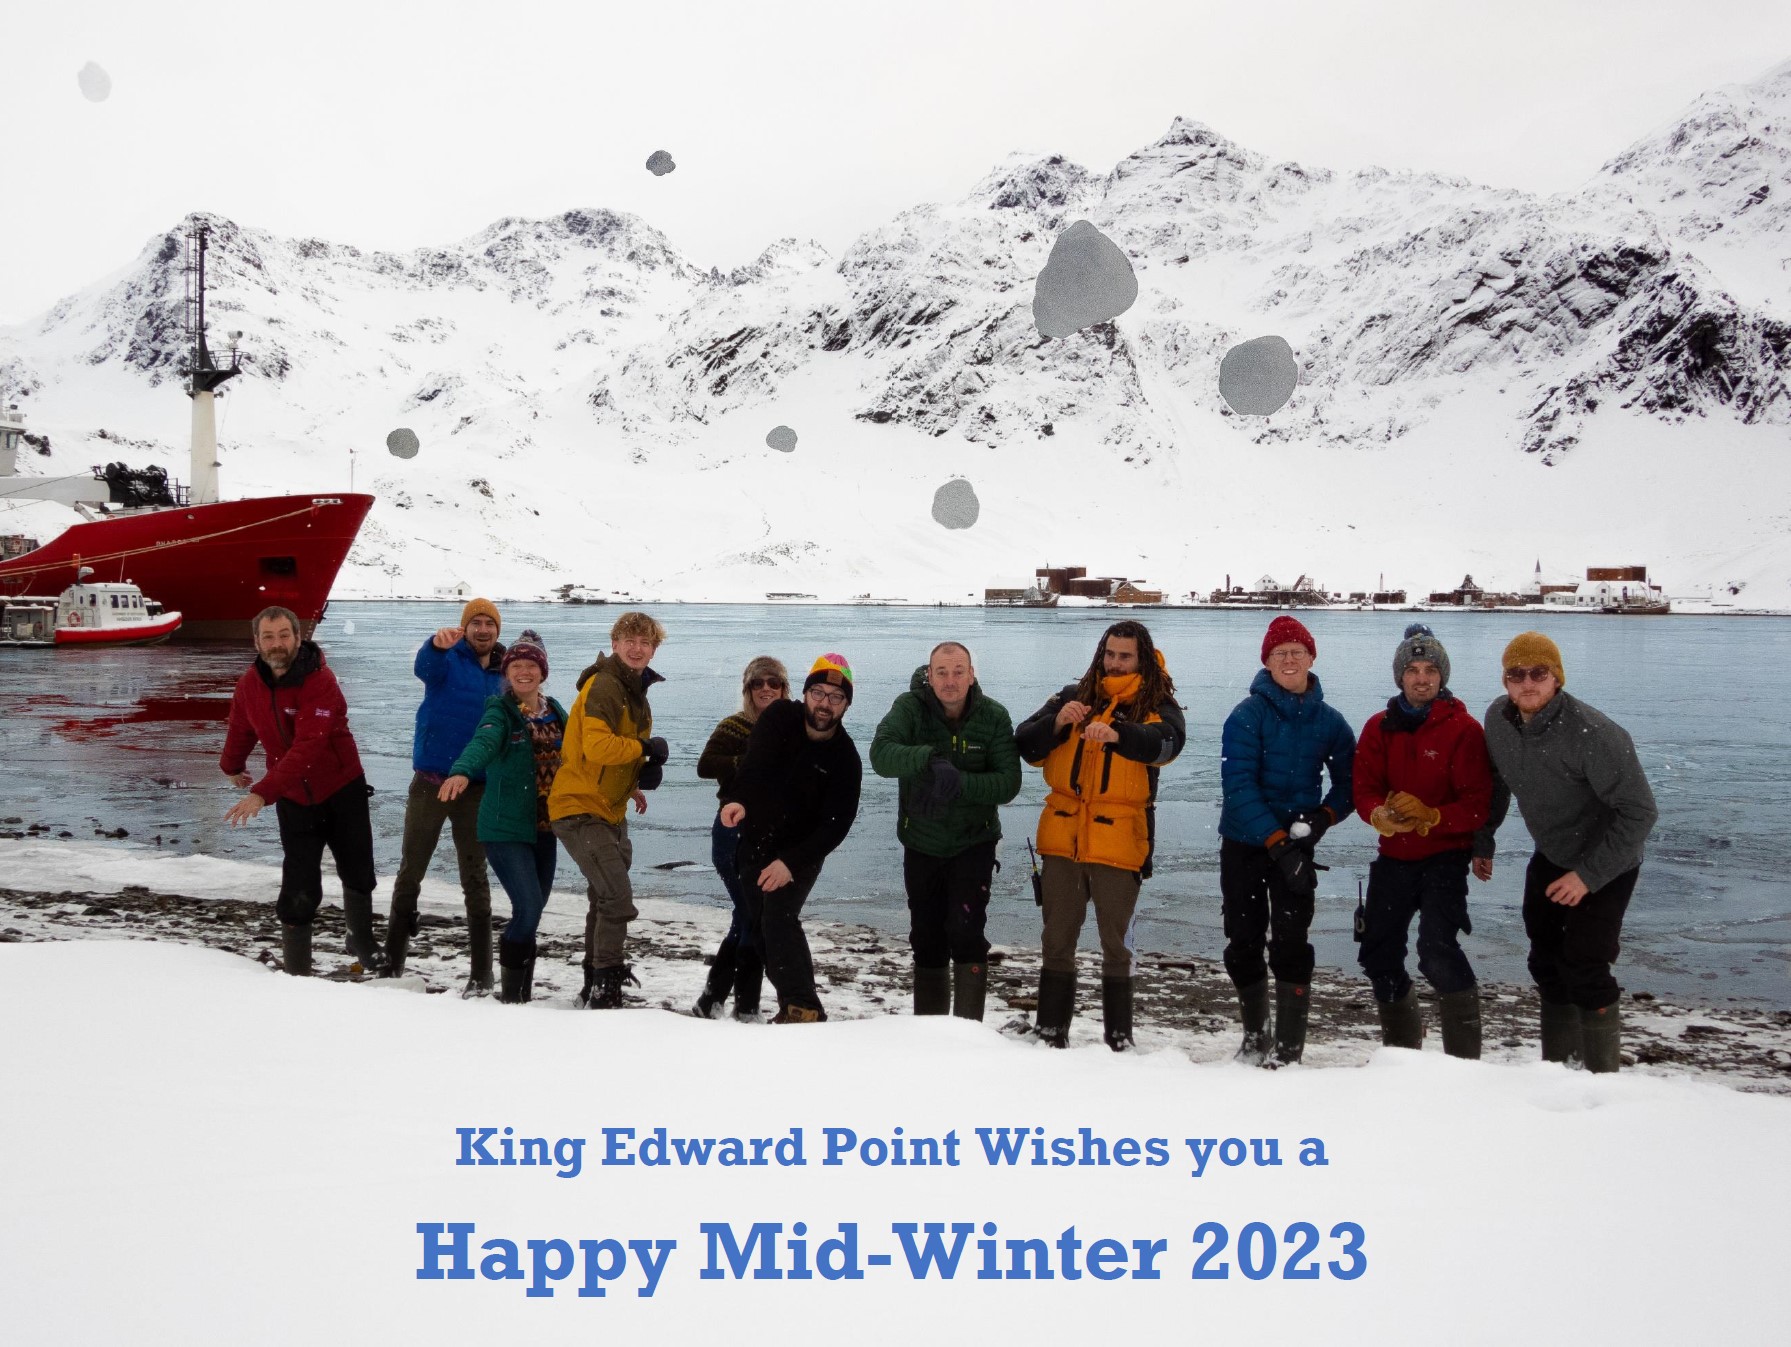 Winterers at King Edward Point wishing everyone a Happy Midwinter